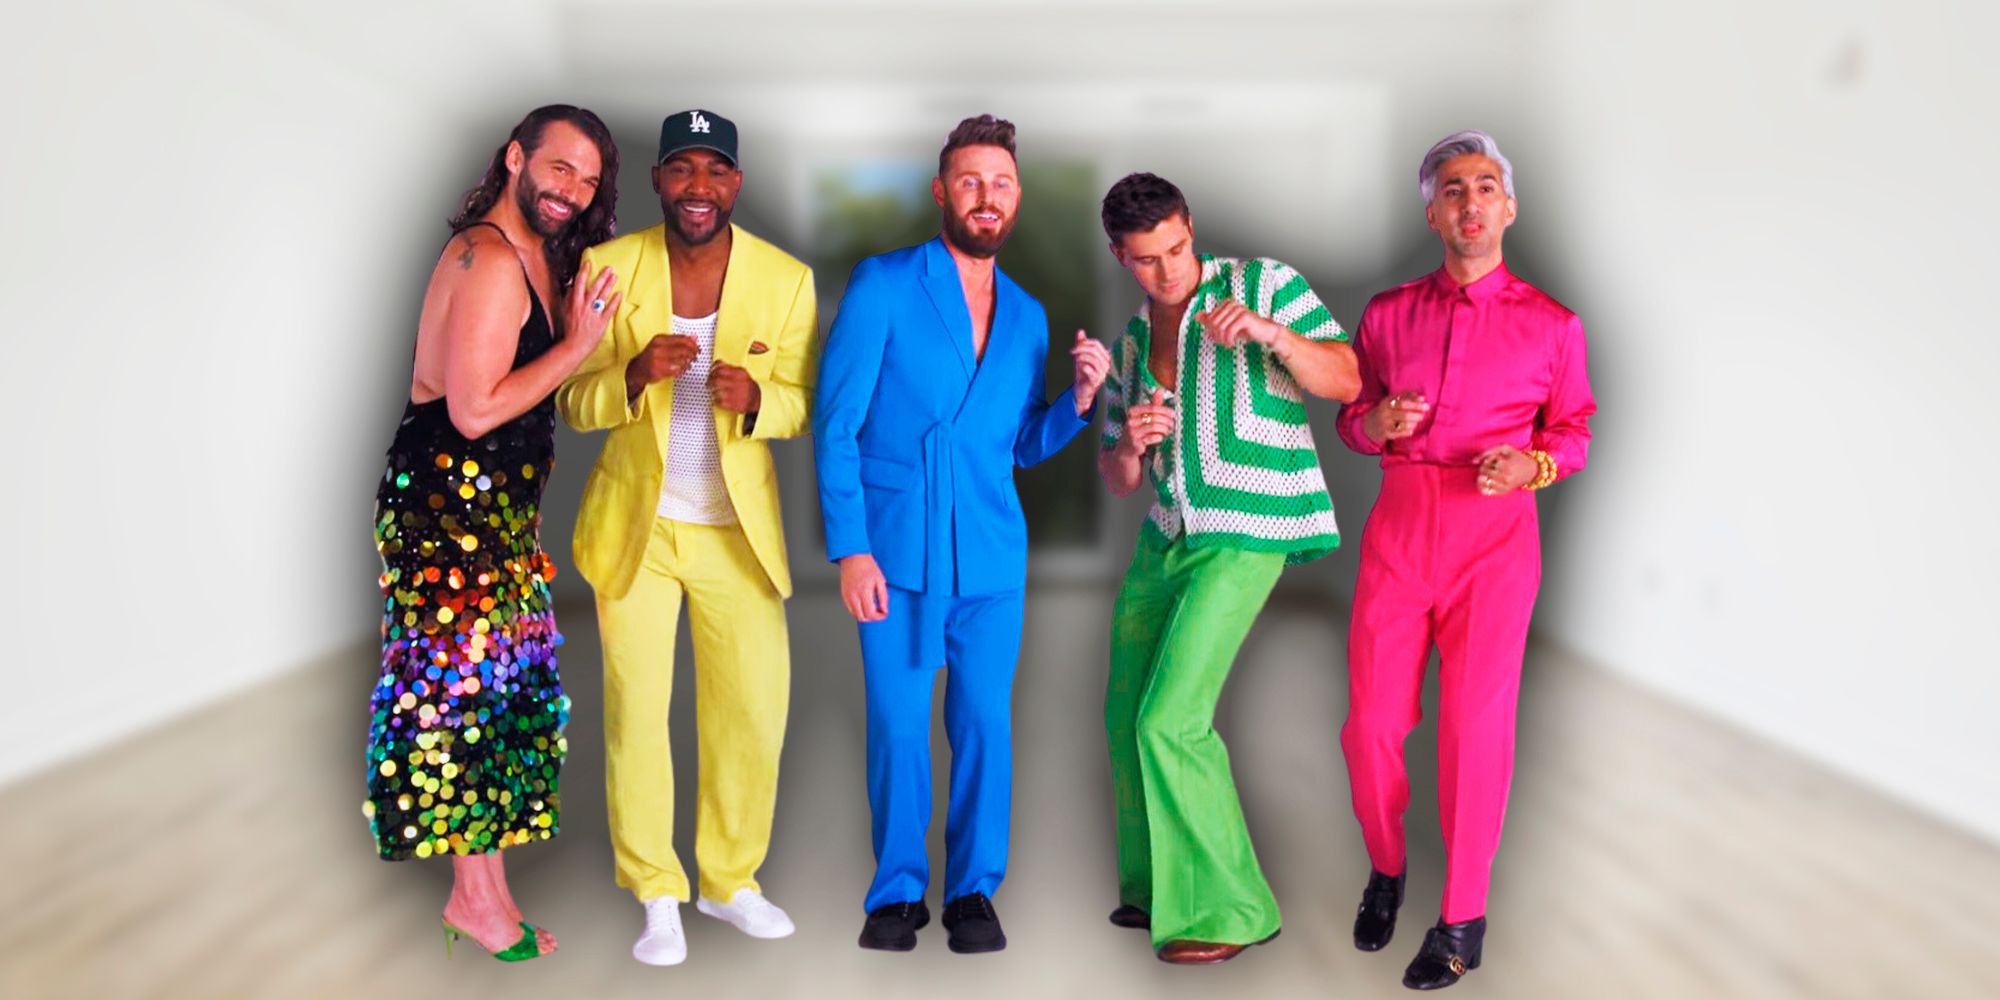 queer eye 5 cast in bright outfits fab five